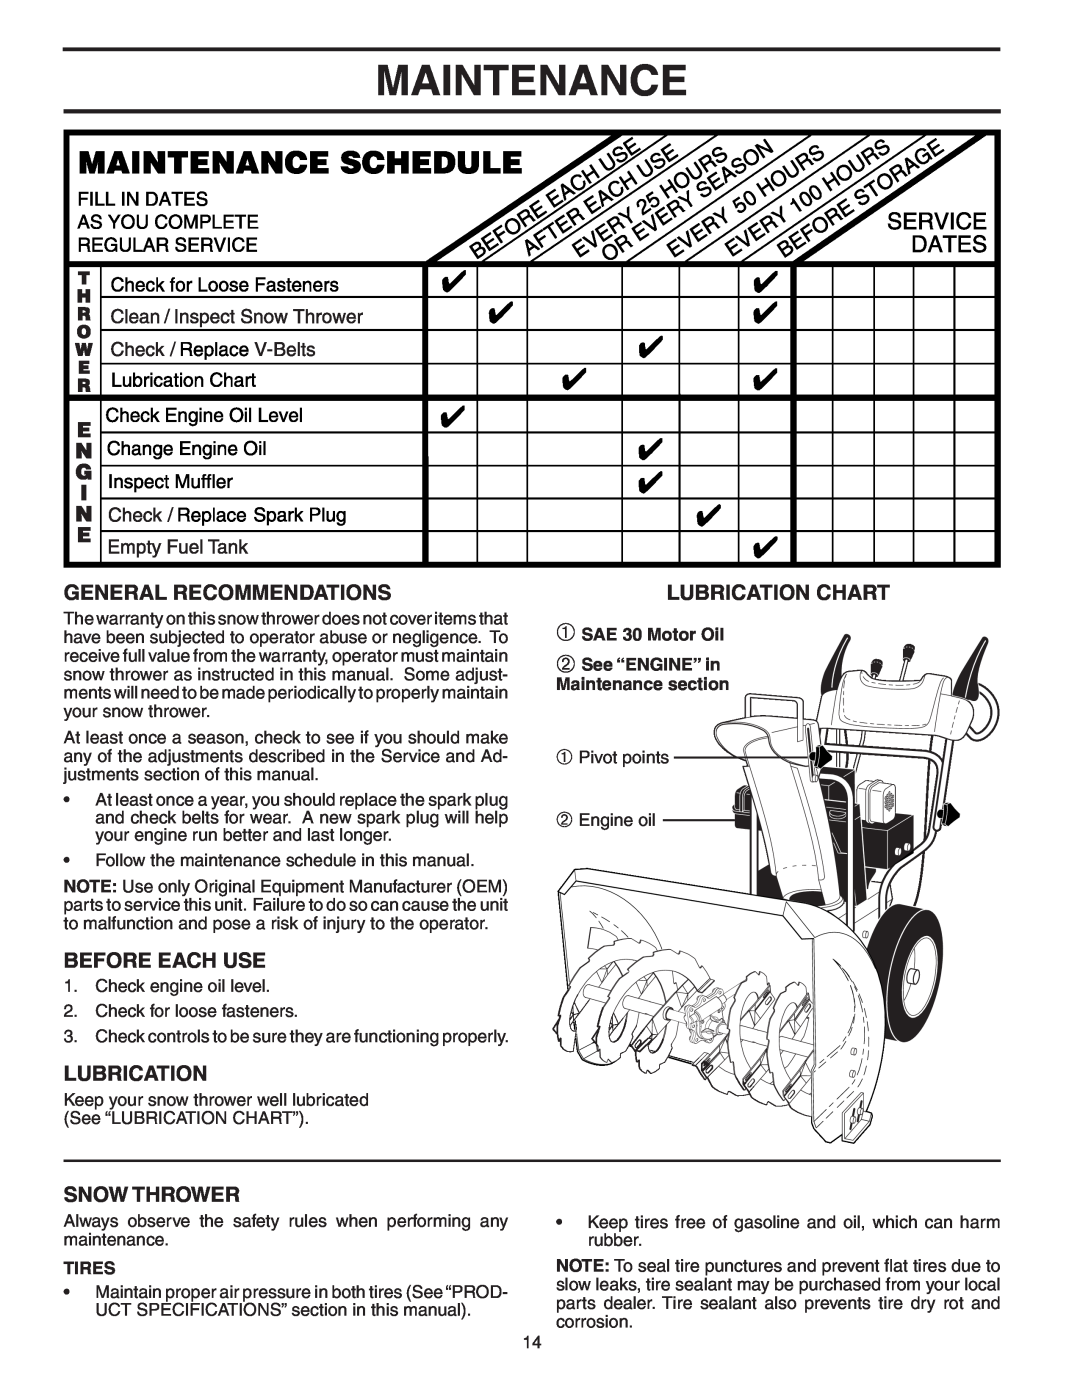 Poulan 187877 Maintenance, General Recommendations, Before Each Use, Snow Thrower, Lubrication Chart, Tires 